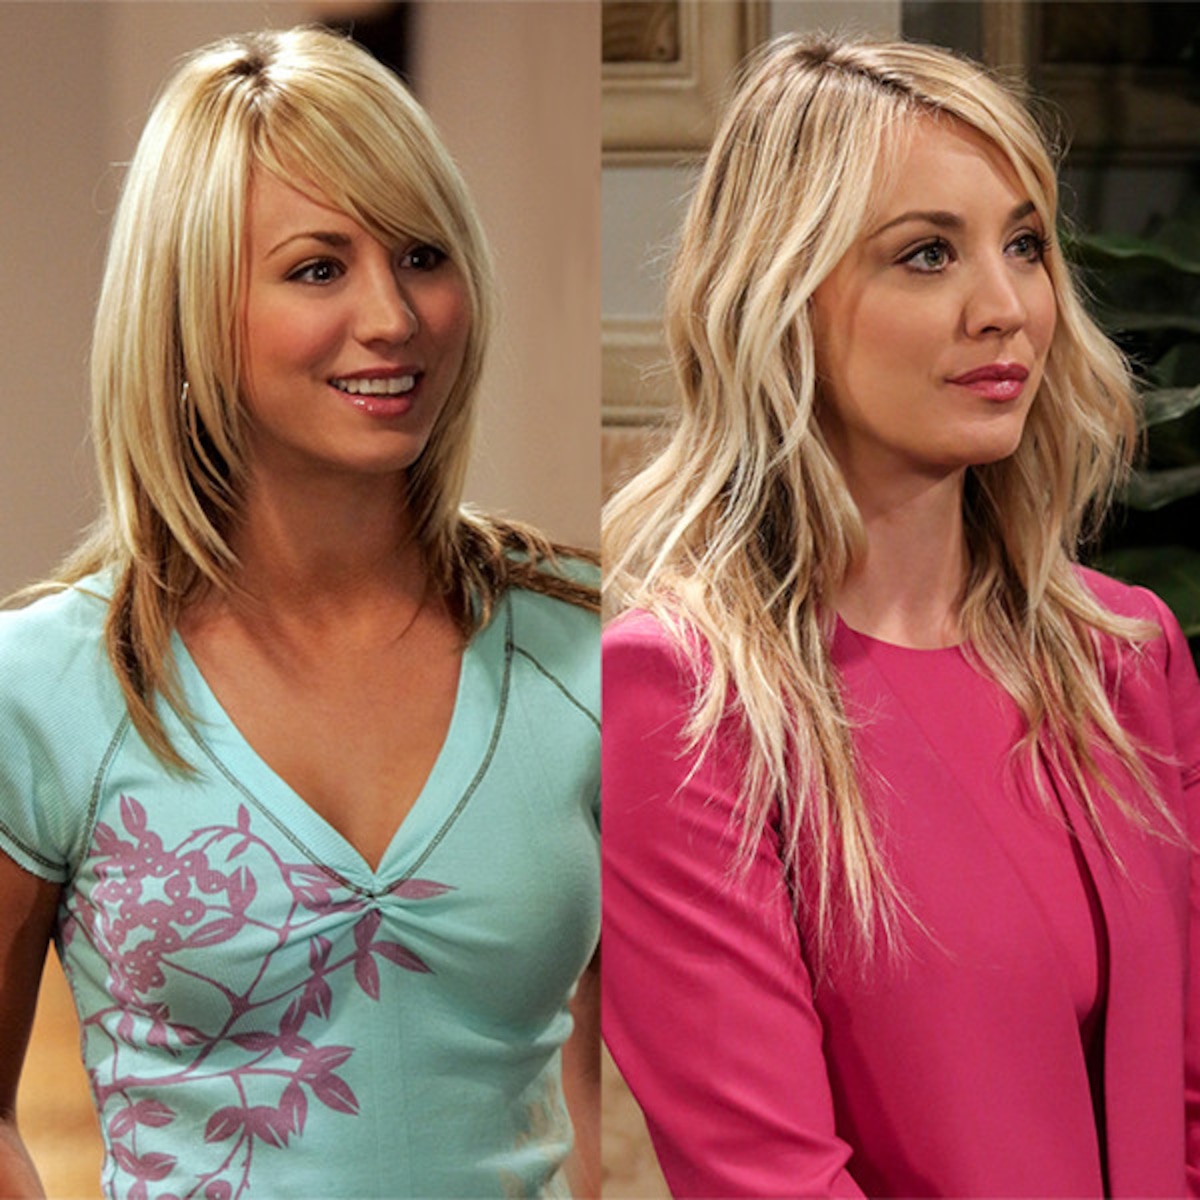 Kaley Cuoco Recalls Being Shocked When Ending Big Bang Theory E Online Deutschland See more ideas about big bang theory, bigbang, sheldon. kaley cuoco recalls being shocked